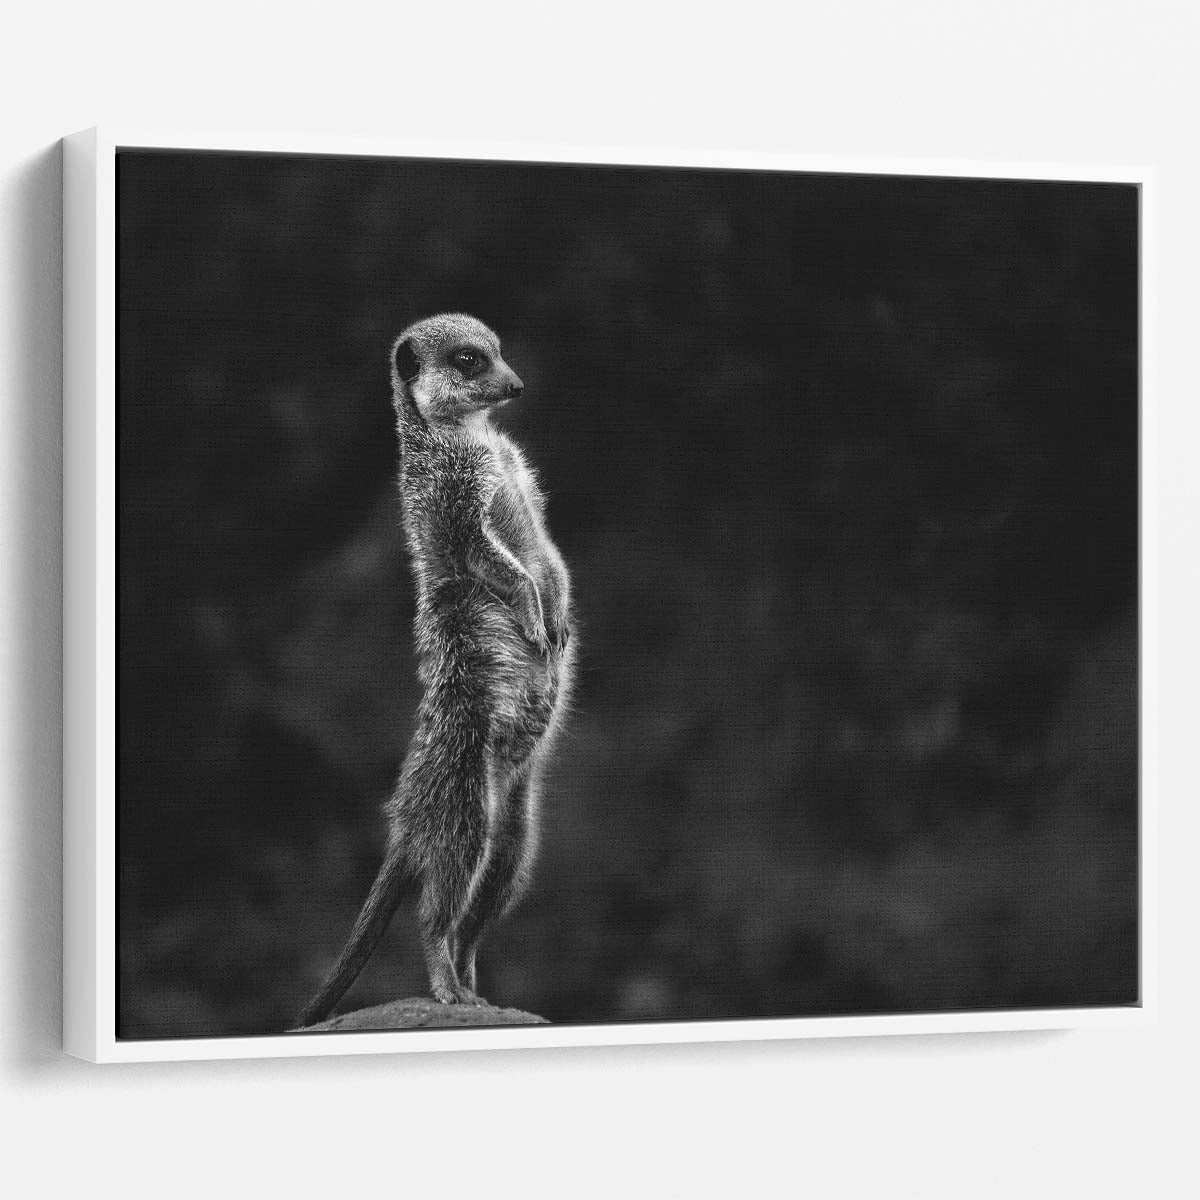 Monochrome Meerkat Safari Observer Wall Art by Luxuriance Designs. Made in USA.